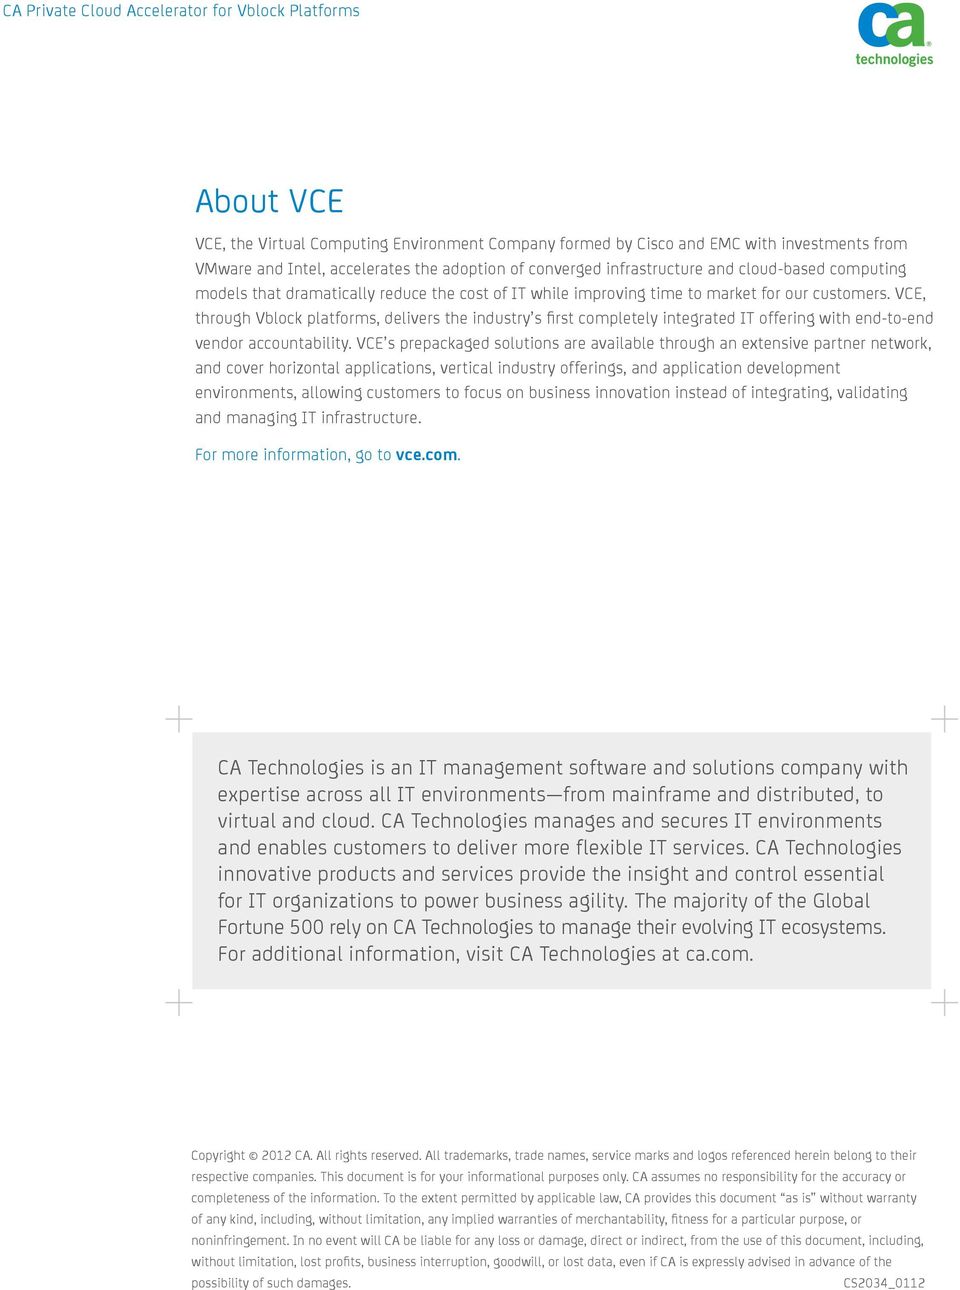 VCE, through Vblock platforms, delivers the industry s first completely integrated IT offering with end-to-end vendor accountability.